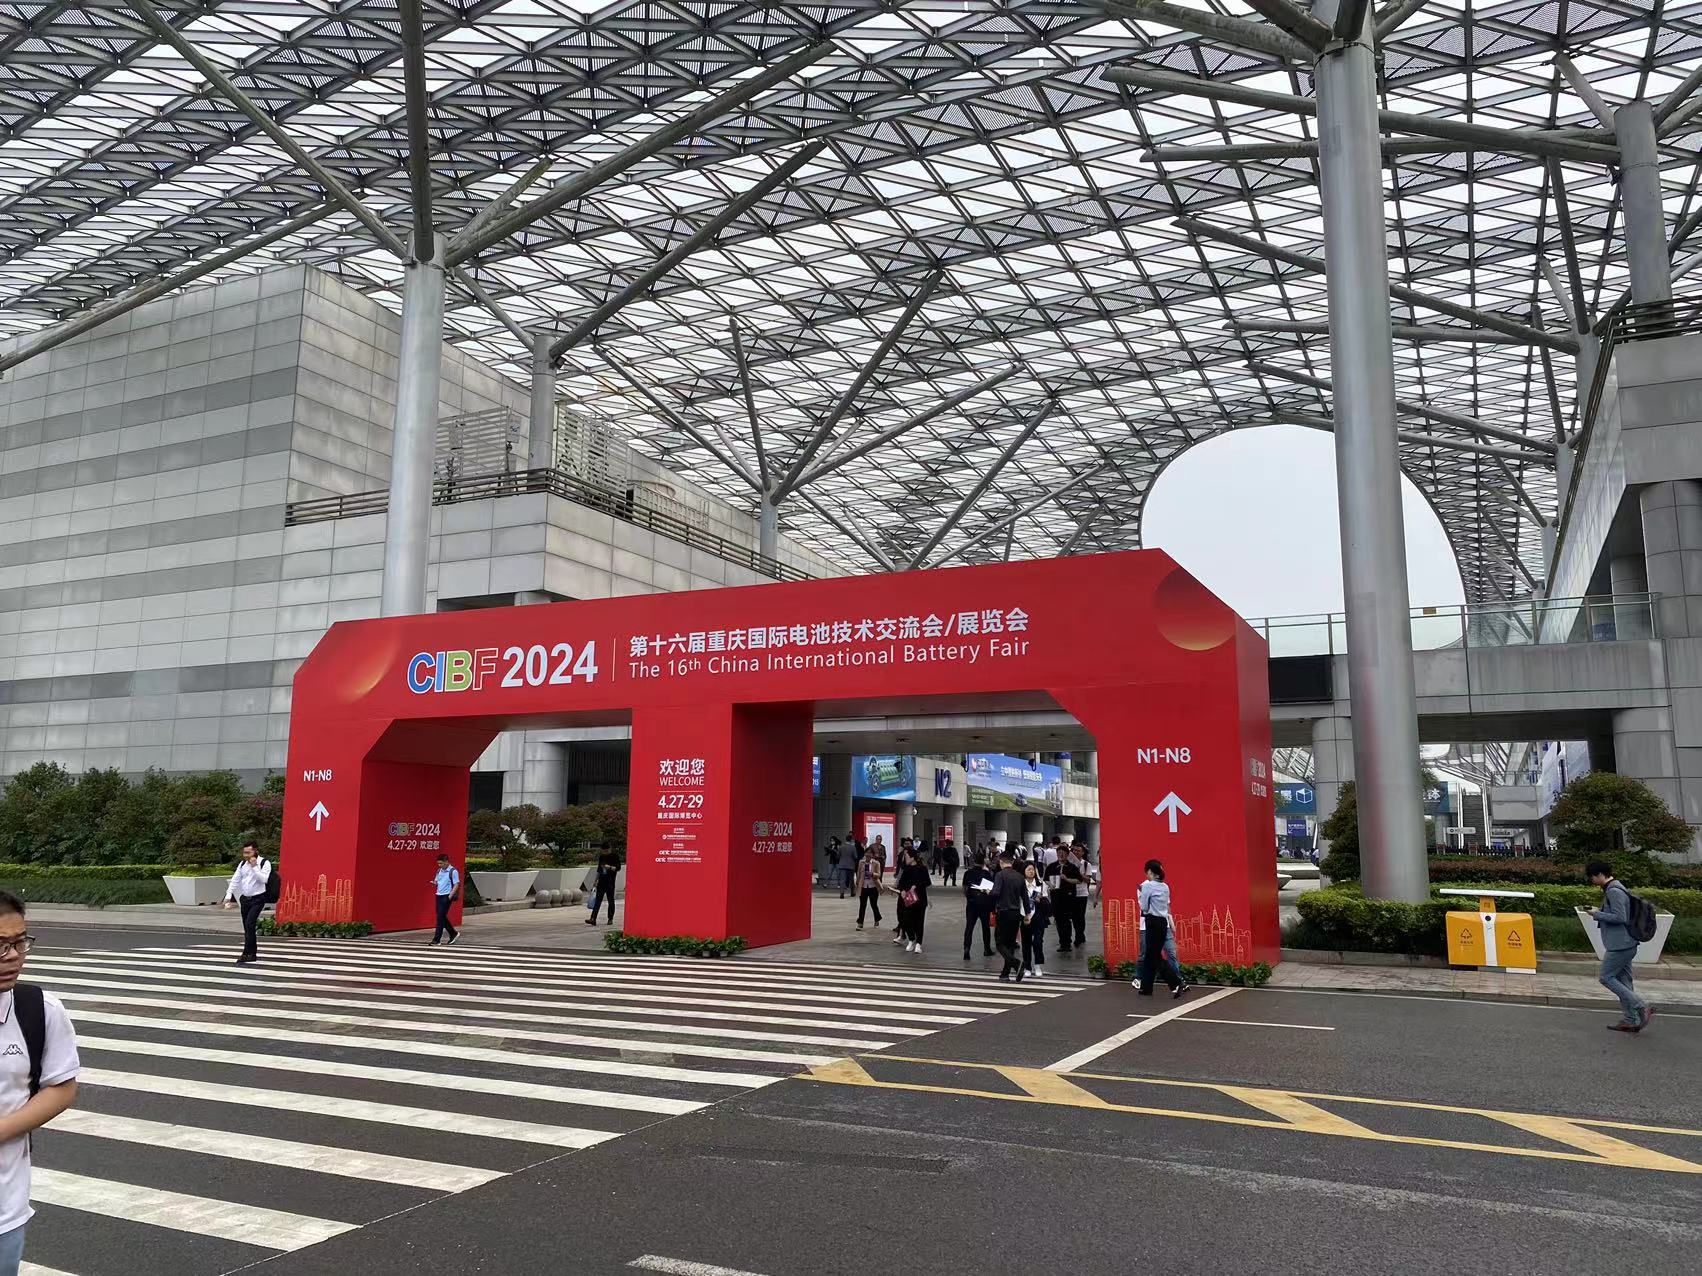 SUNJ Energy participated in the 16th China International Battery Fair 